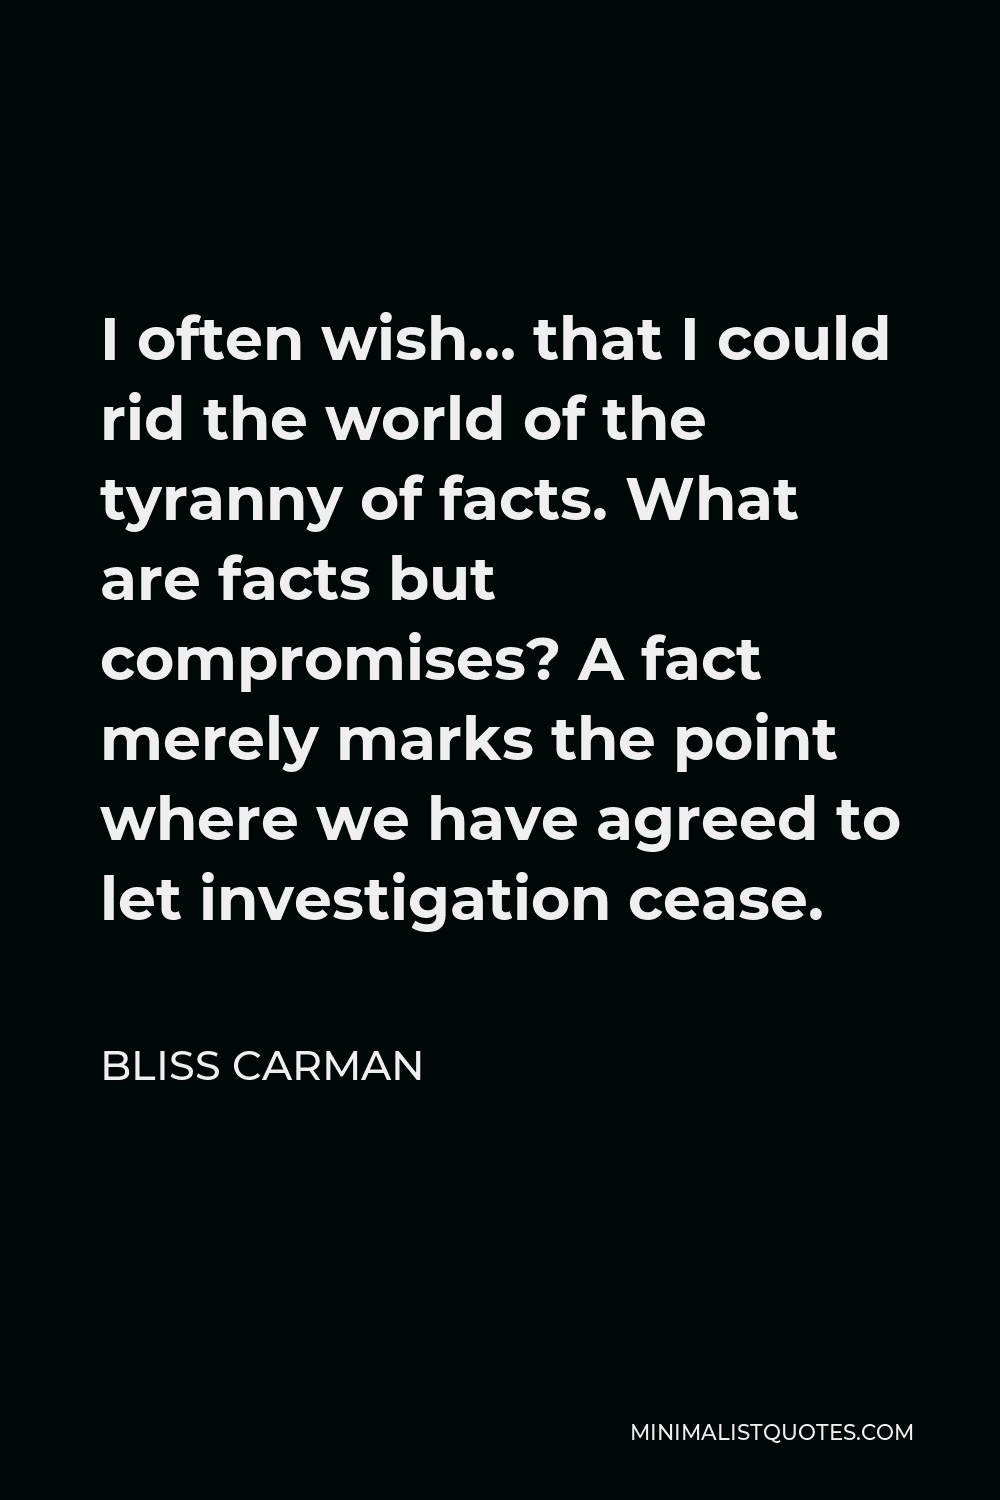 Bliss Carman Quote - I often wish… that I could rid the world of the tyranny of facts. What are facts but compromises? A fact merely marks the point where we have agreed to let investigation cease.